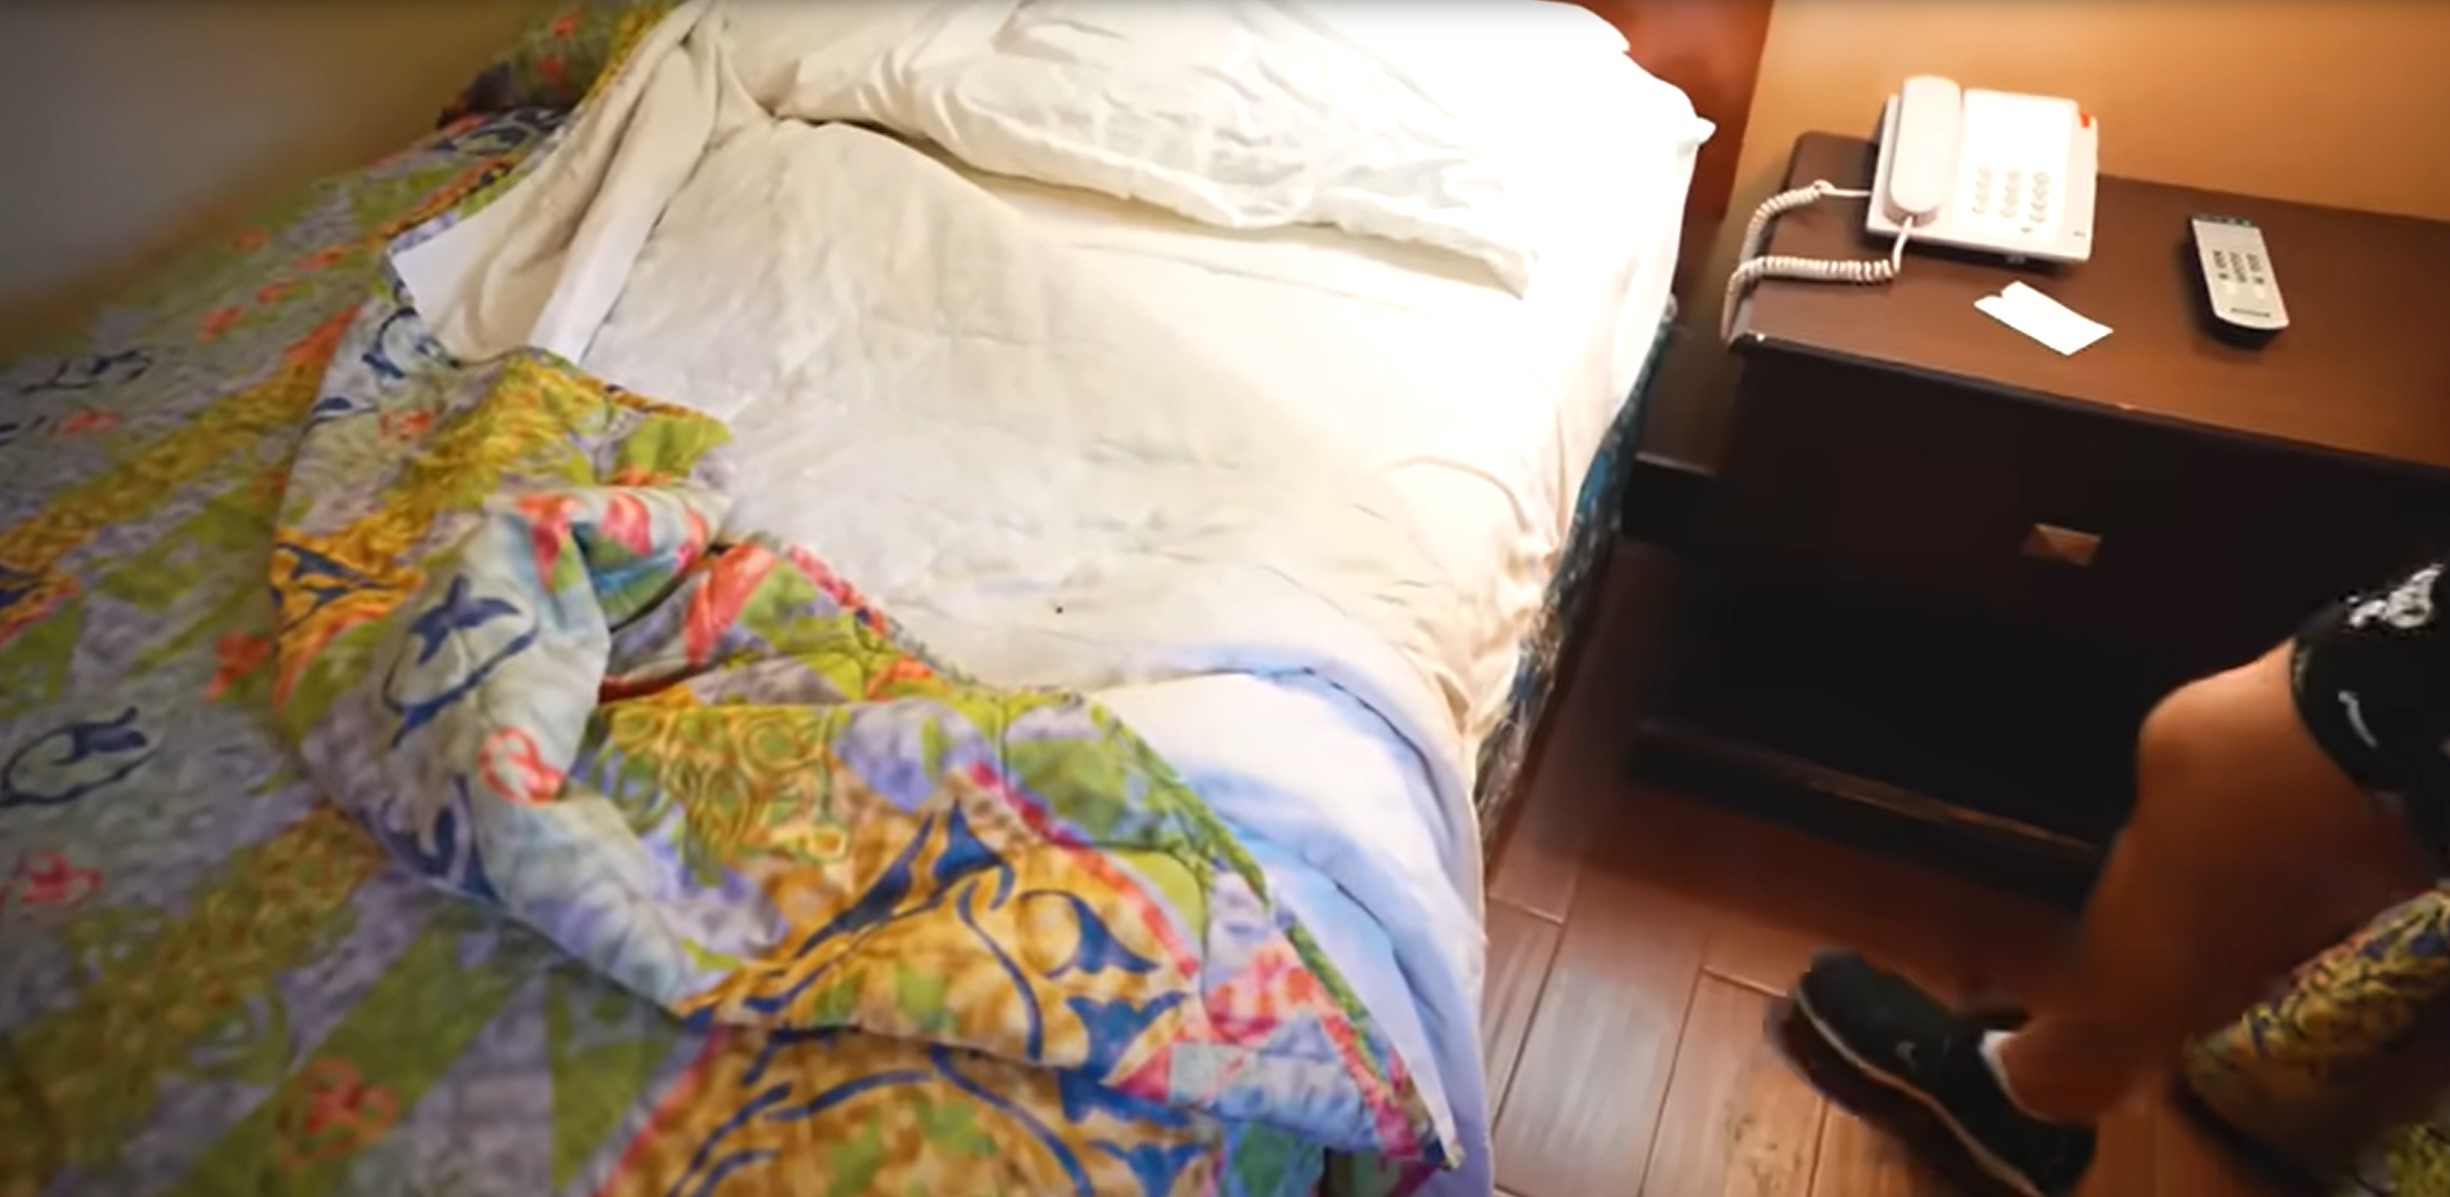 The youtuber claimed to have found a hair and stains on his bed sheets.